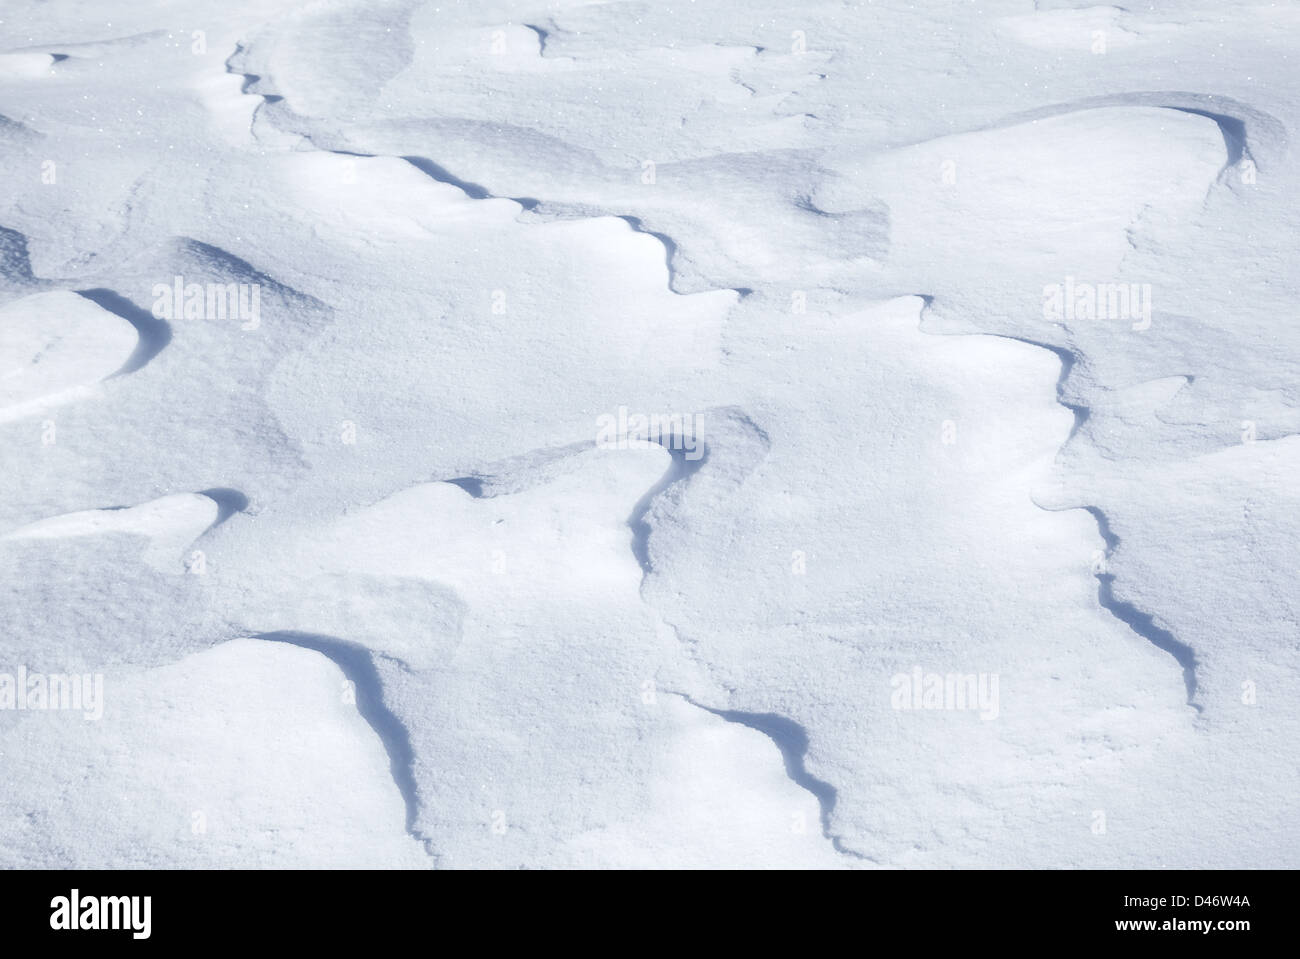 Background texture of hilly snowdrift with nice curved shadows Stock Photo